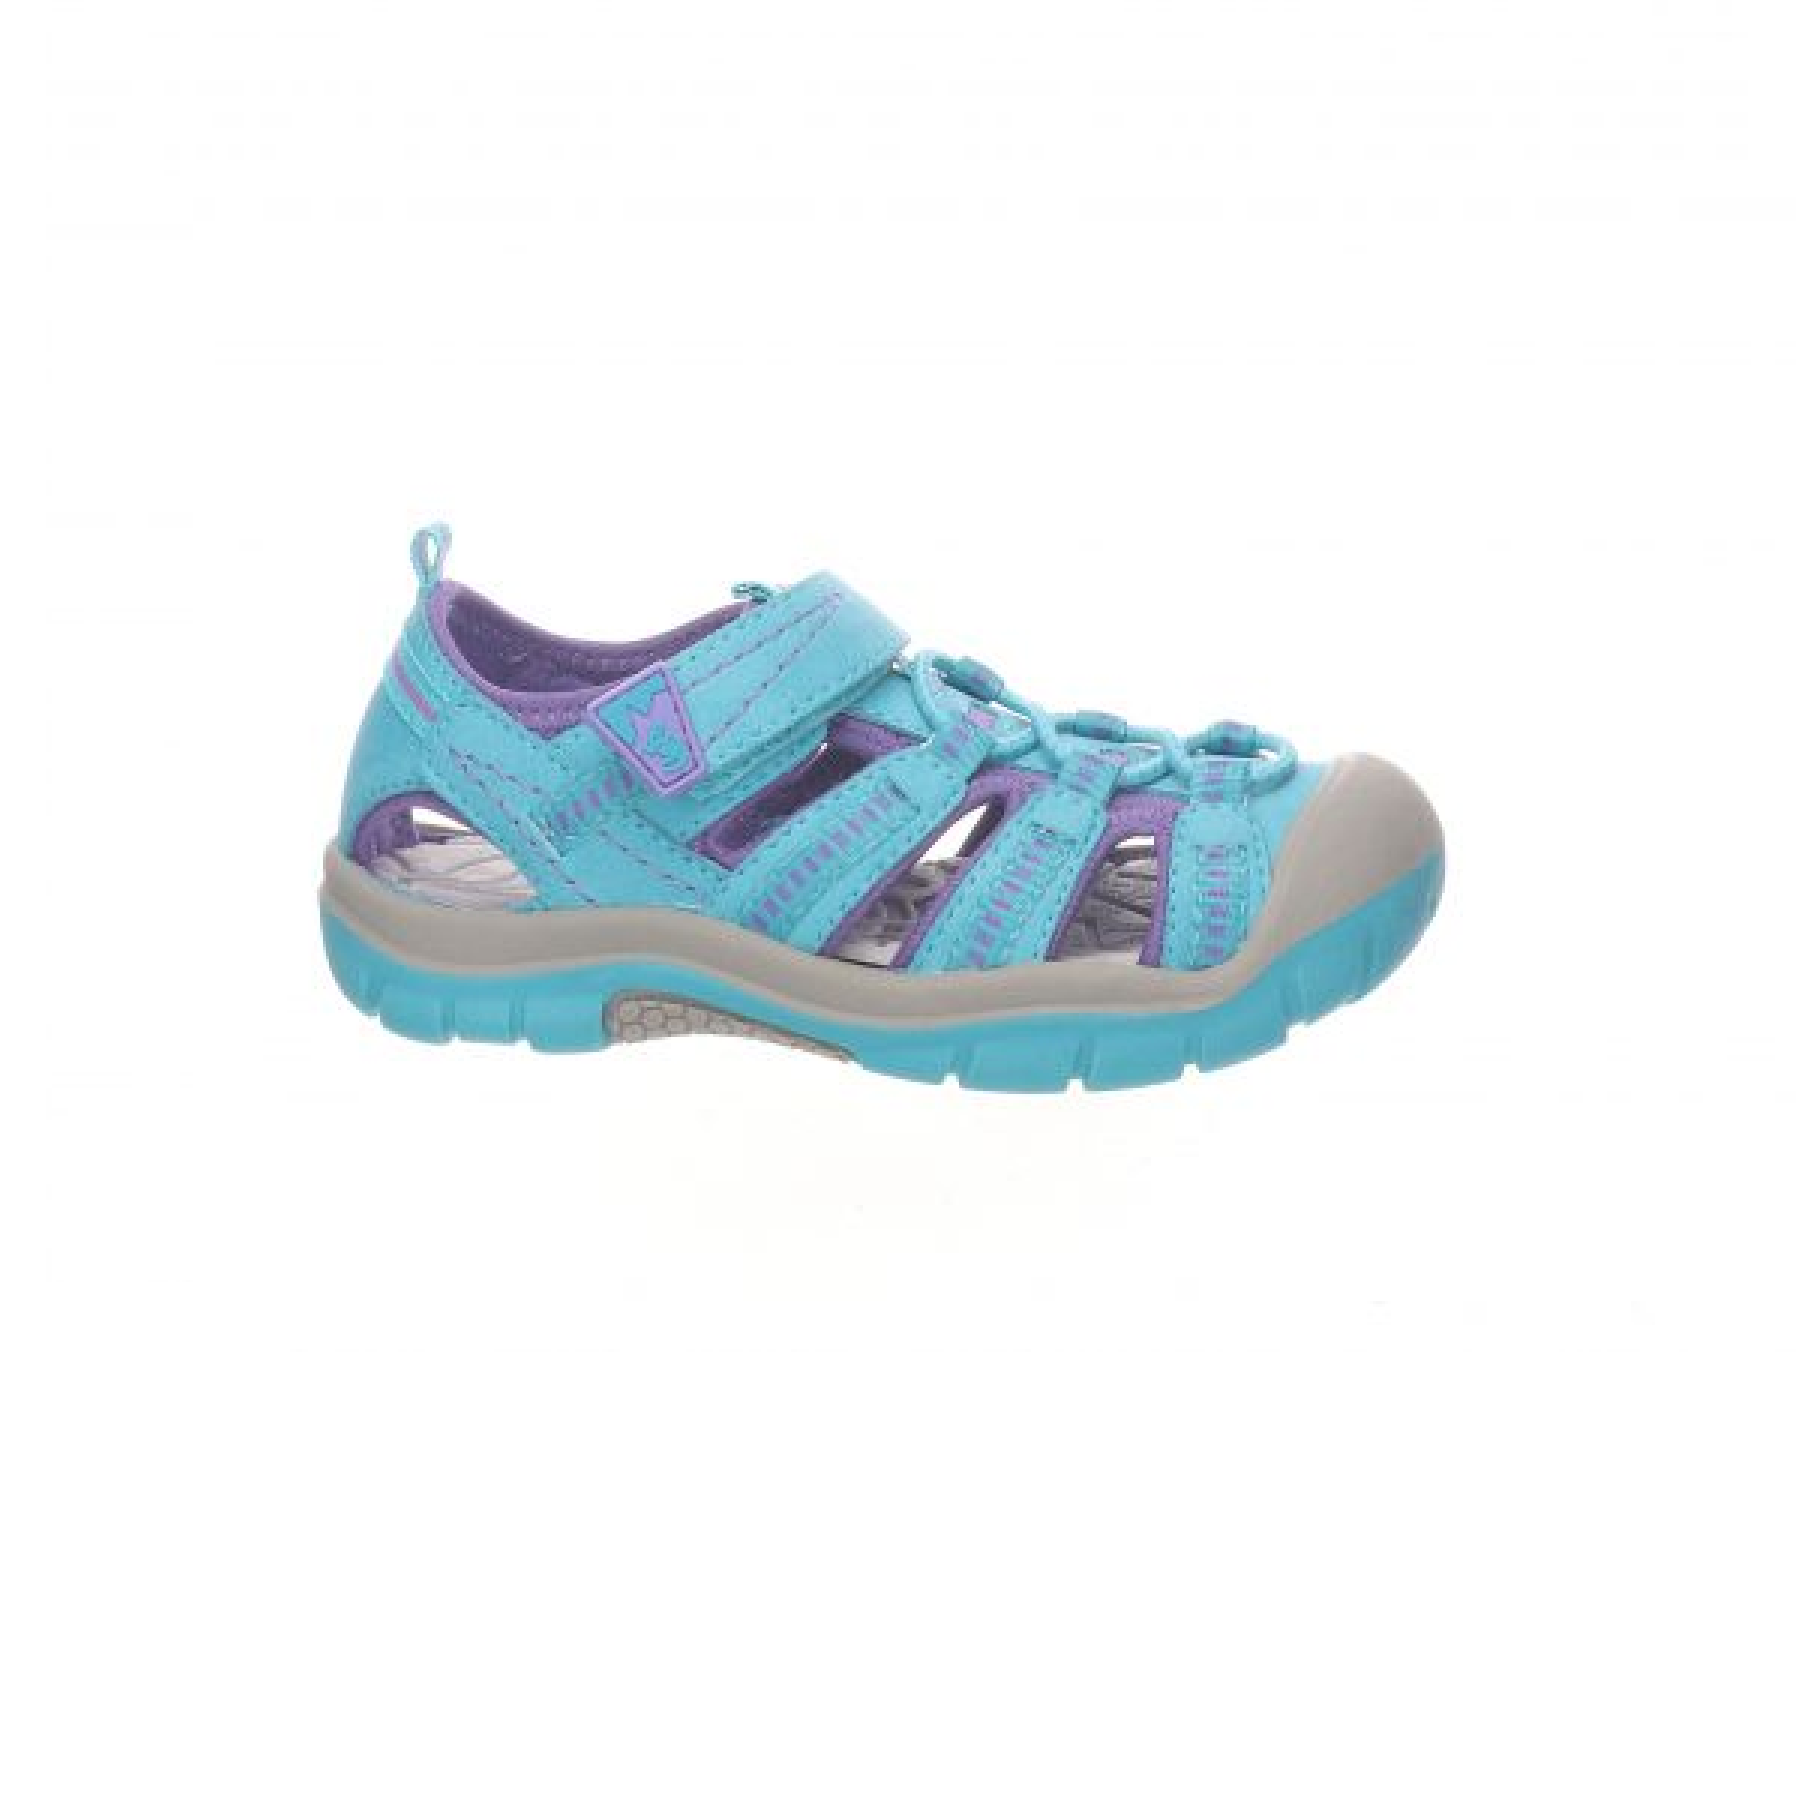 LURCHI GIRLS OPEN SHOES/SANDALS - PETE - 33/21610/40 - TURQUOISE – Chicos &  Chicas Shoes | Riemchensandalen